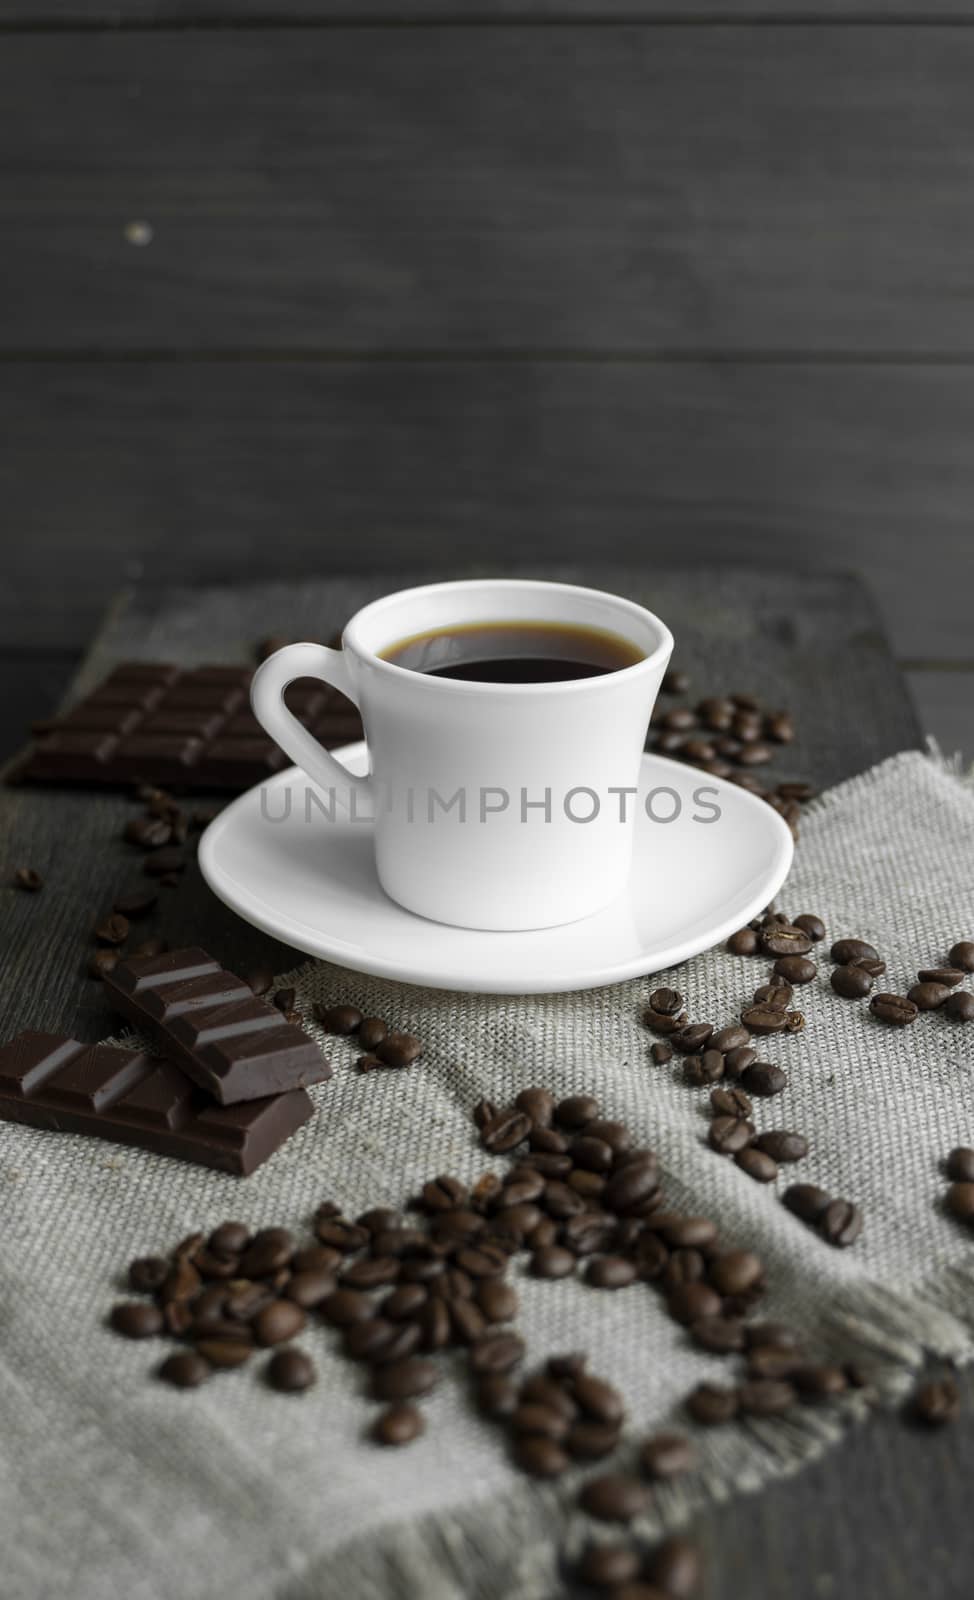 Coffee cup with cookies and chocolate with scattered coffee beans on linen and wooden table background. Mug of black coffee